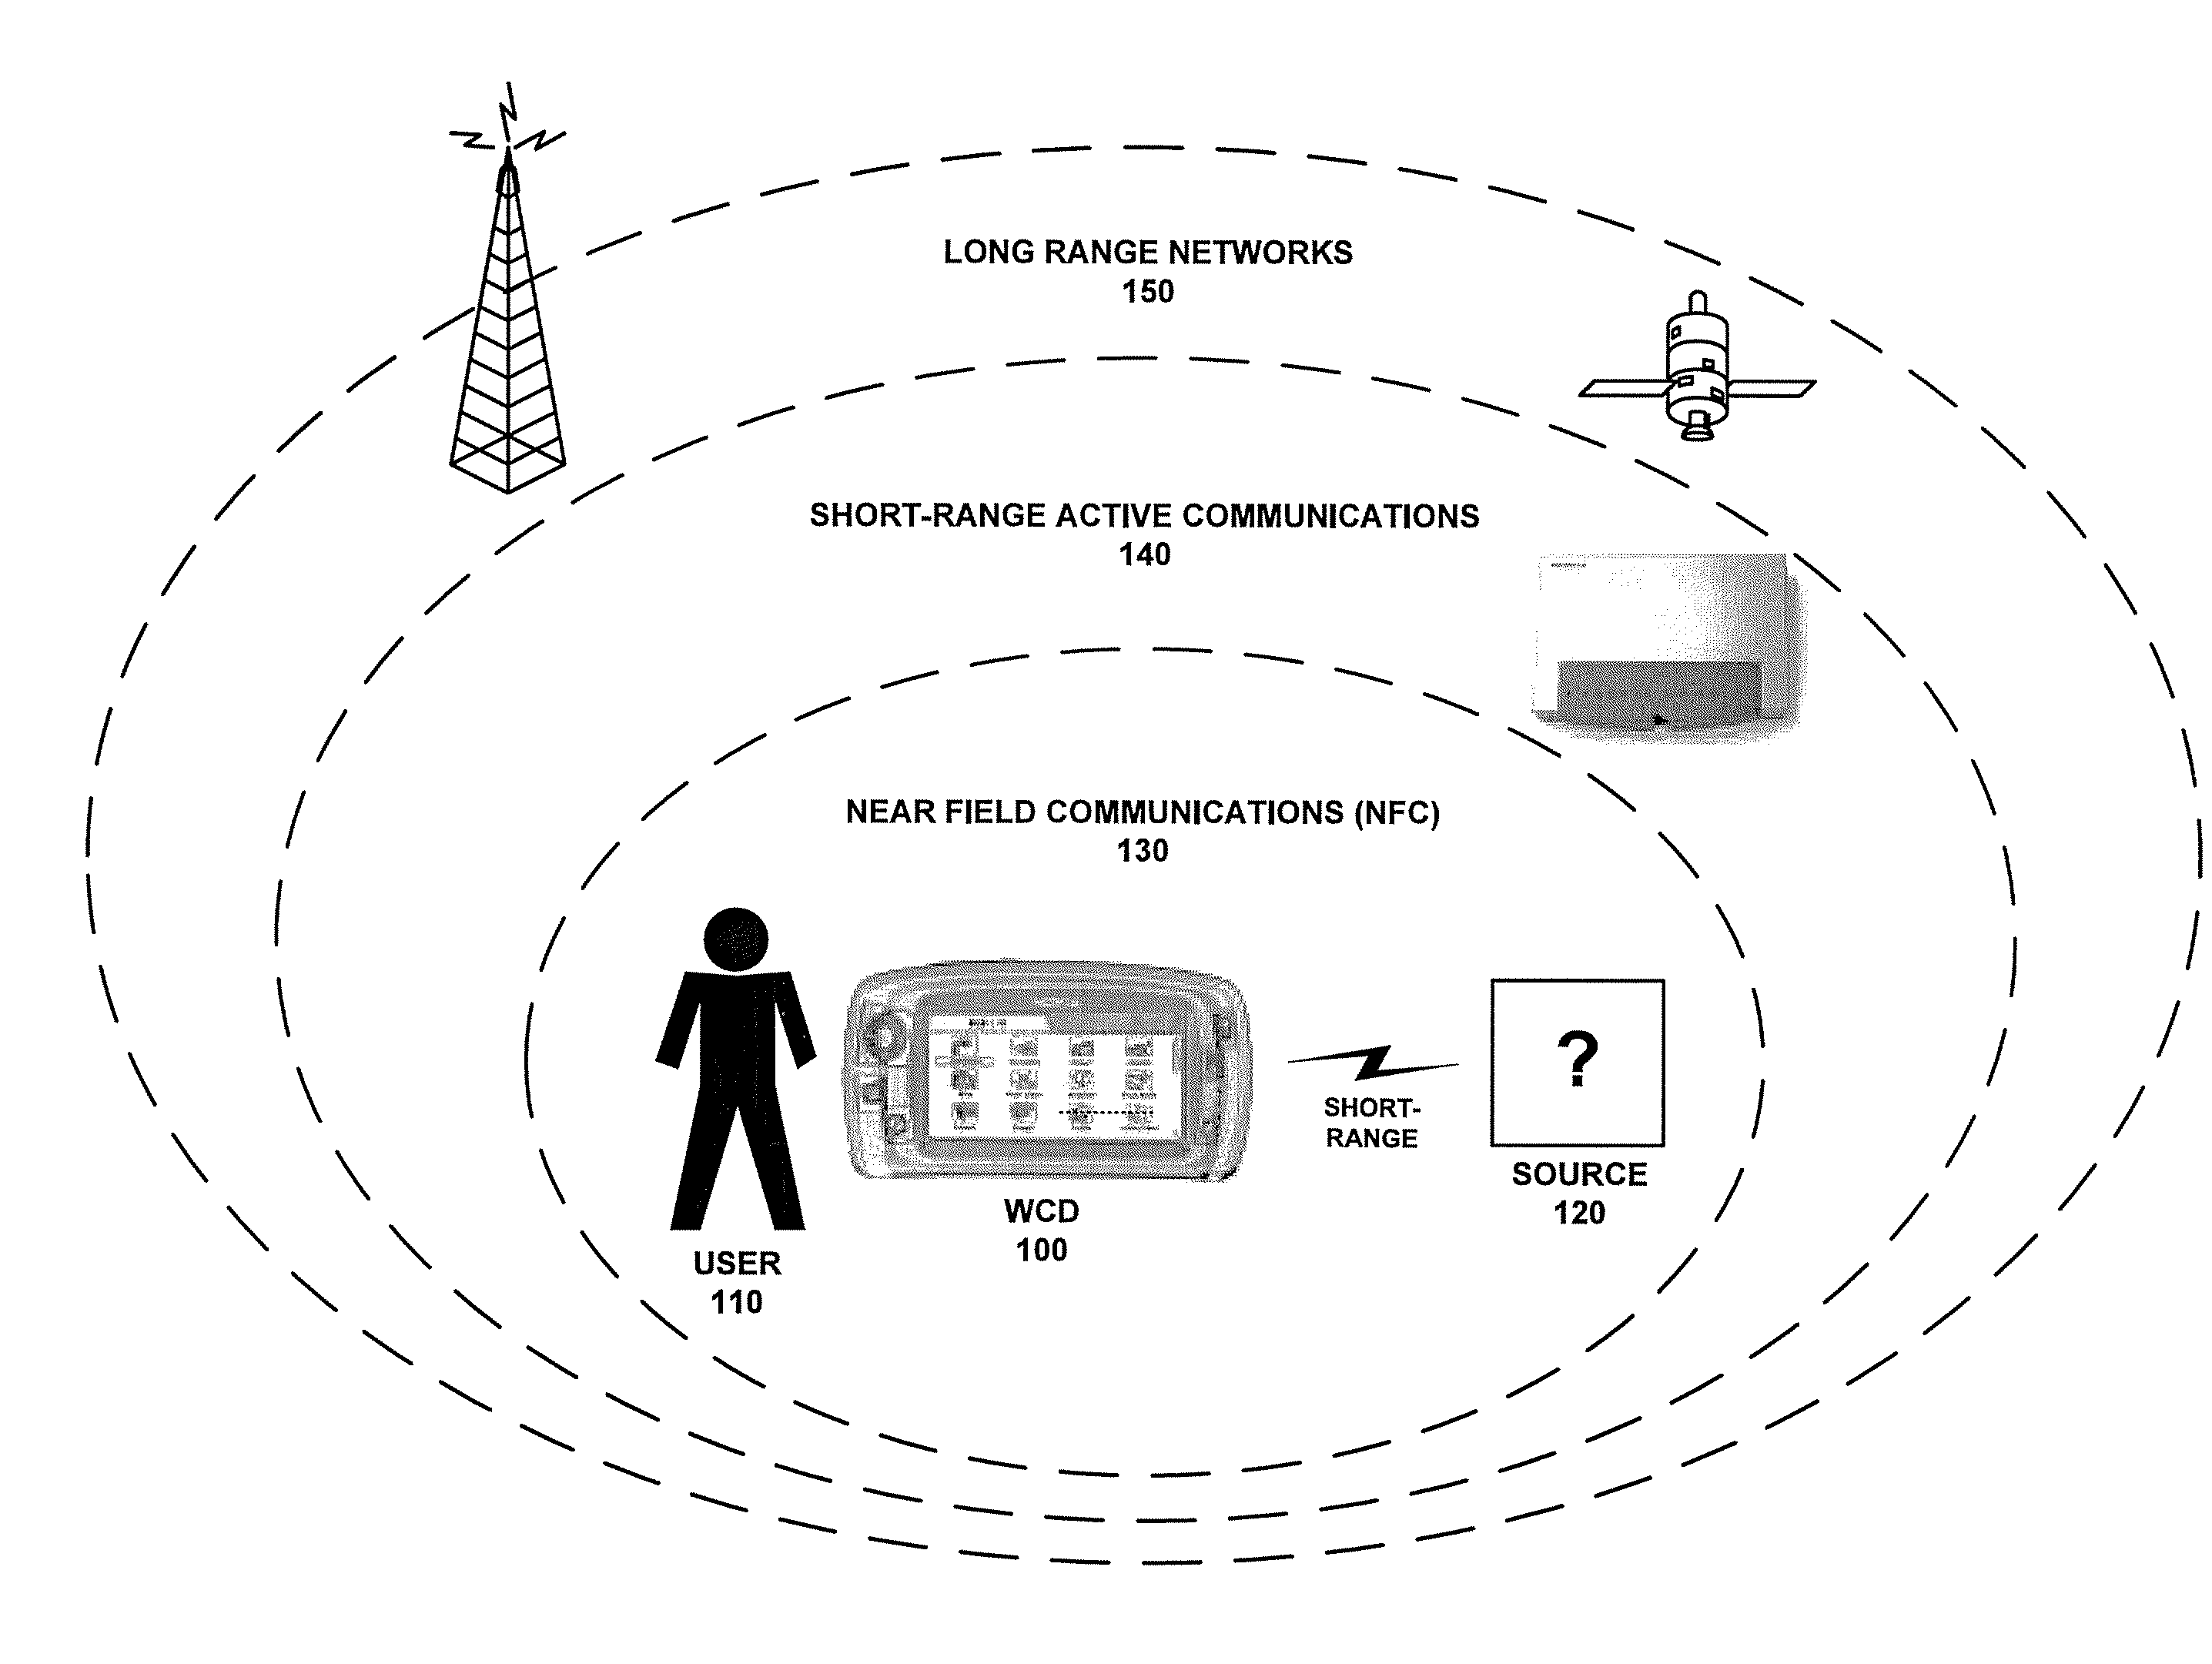 Discontinuous inquiry for wireless communication